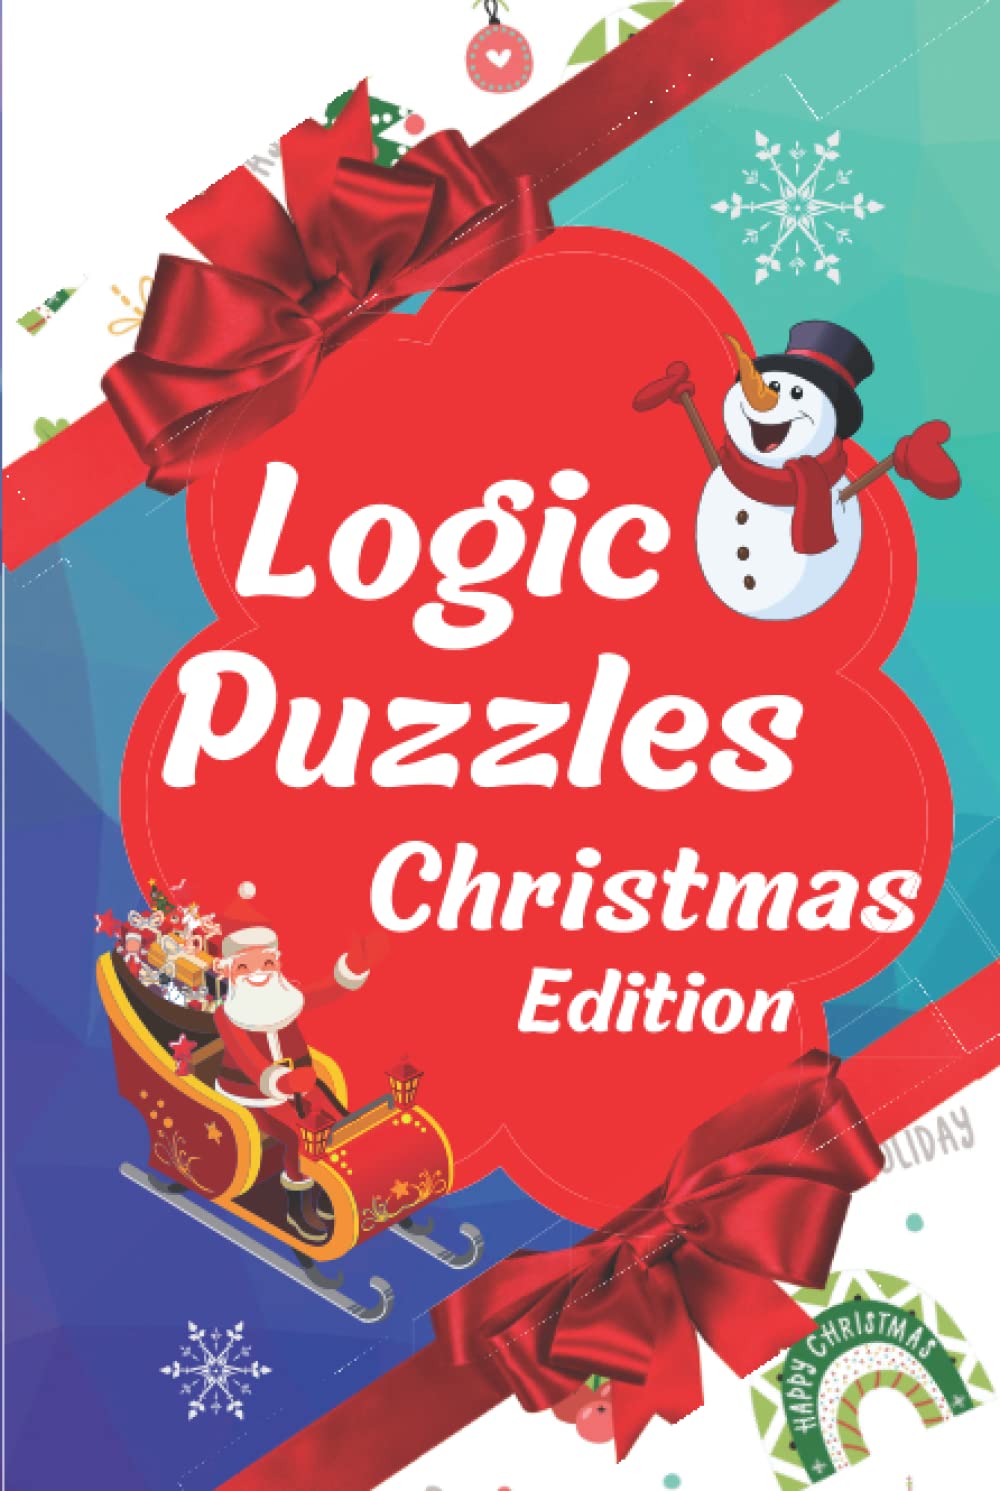 Logic Puzzles Chris as Edition: An Illustrated Collection of Original Chris as-Themed Riddles and Brain Teasers